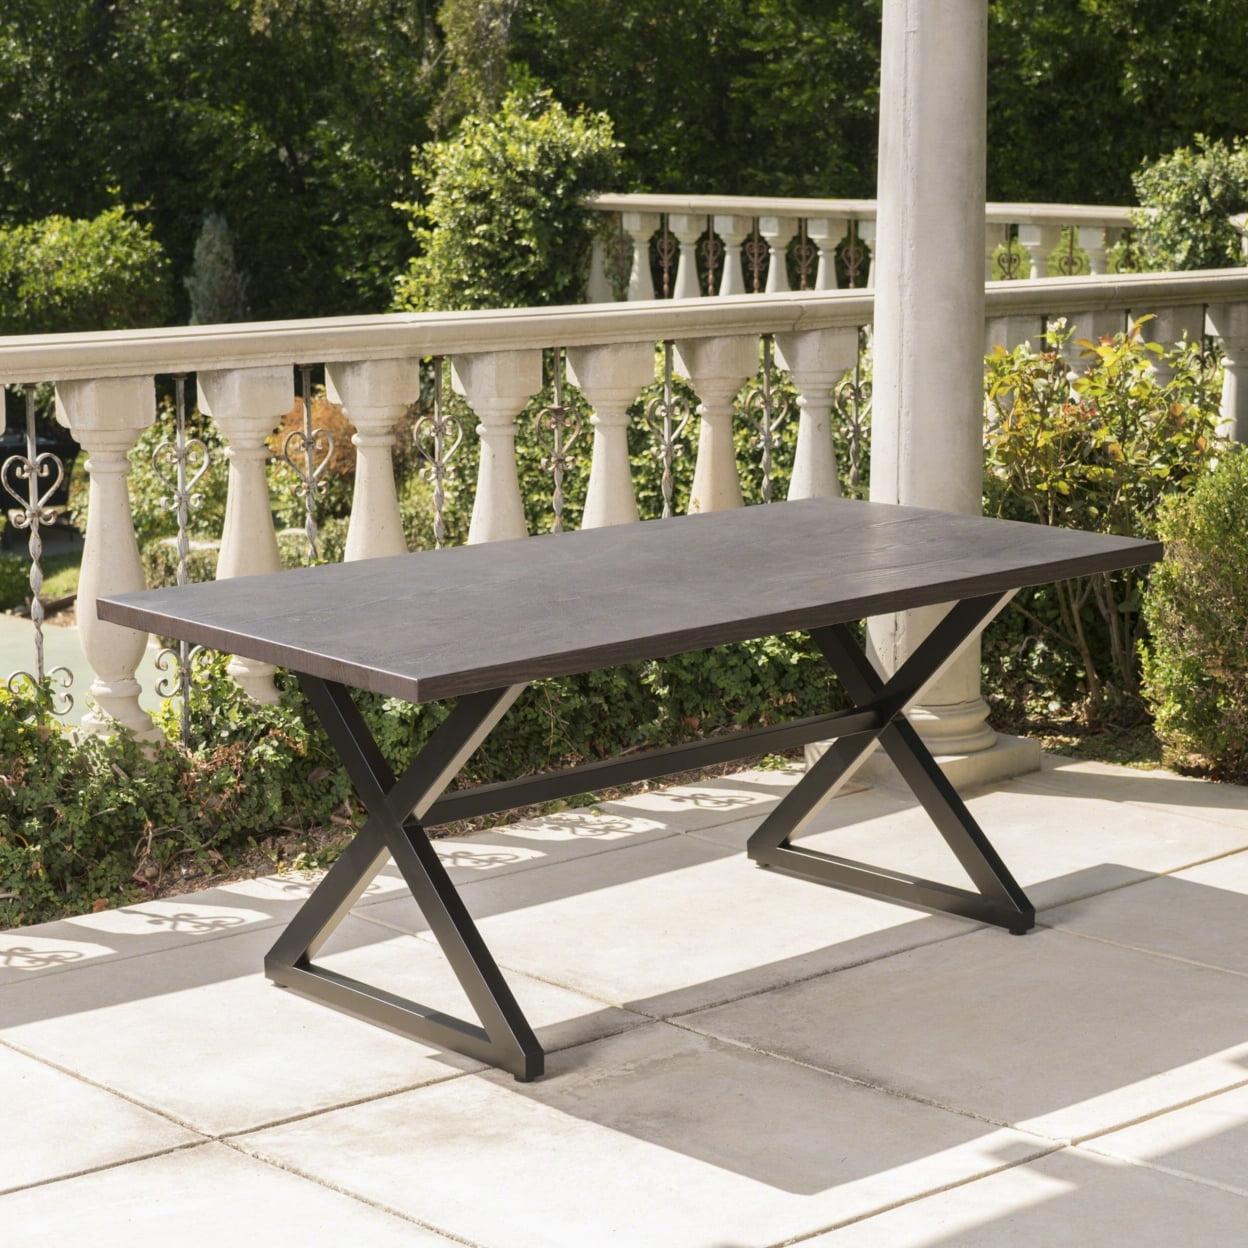 Rosarito Industrial-Modern Gray Aluminum Outdoor Dining Table with Black Steel Frame